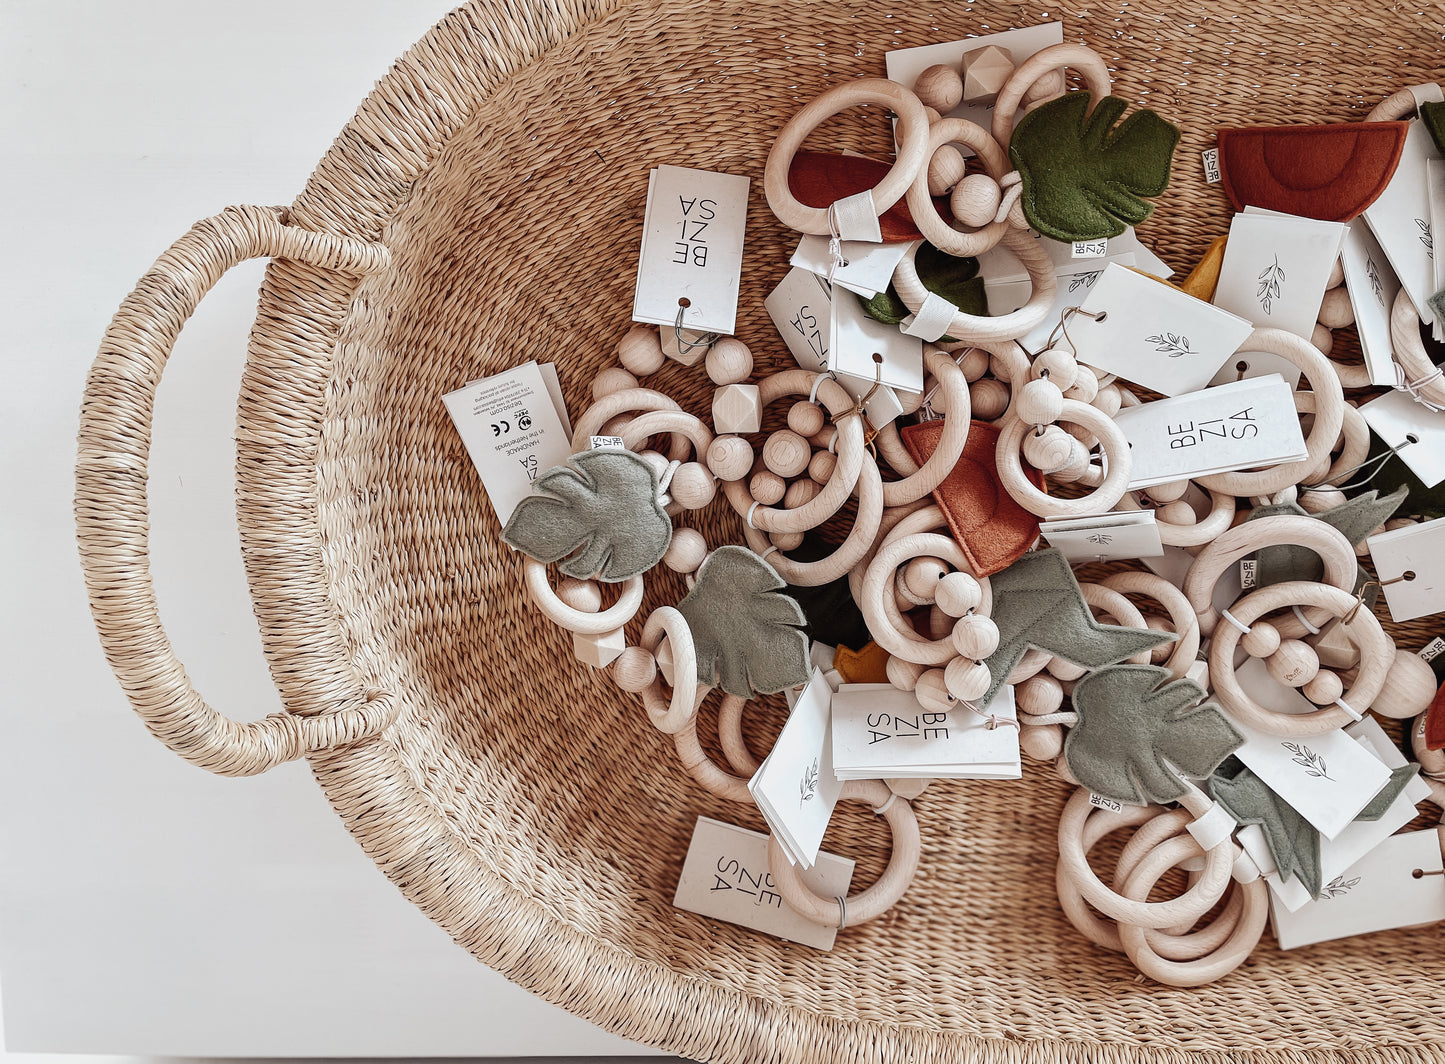 A collection of baby teethers and wooden rattles from Bezisa. A mix of monstera leaf in pistachio green felt with a beech wood ring teether, rust colour sunset rainbow teether, all in a wicker basket.